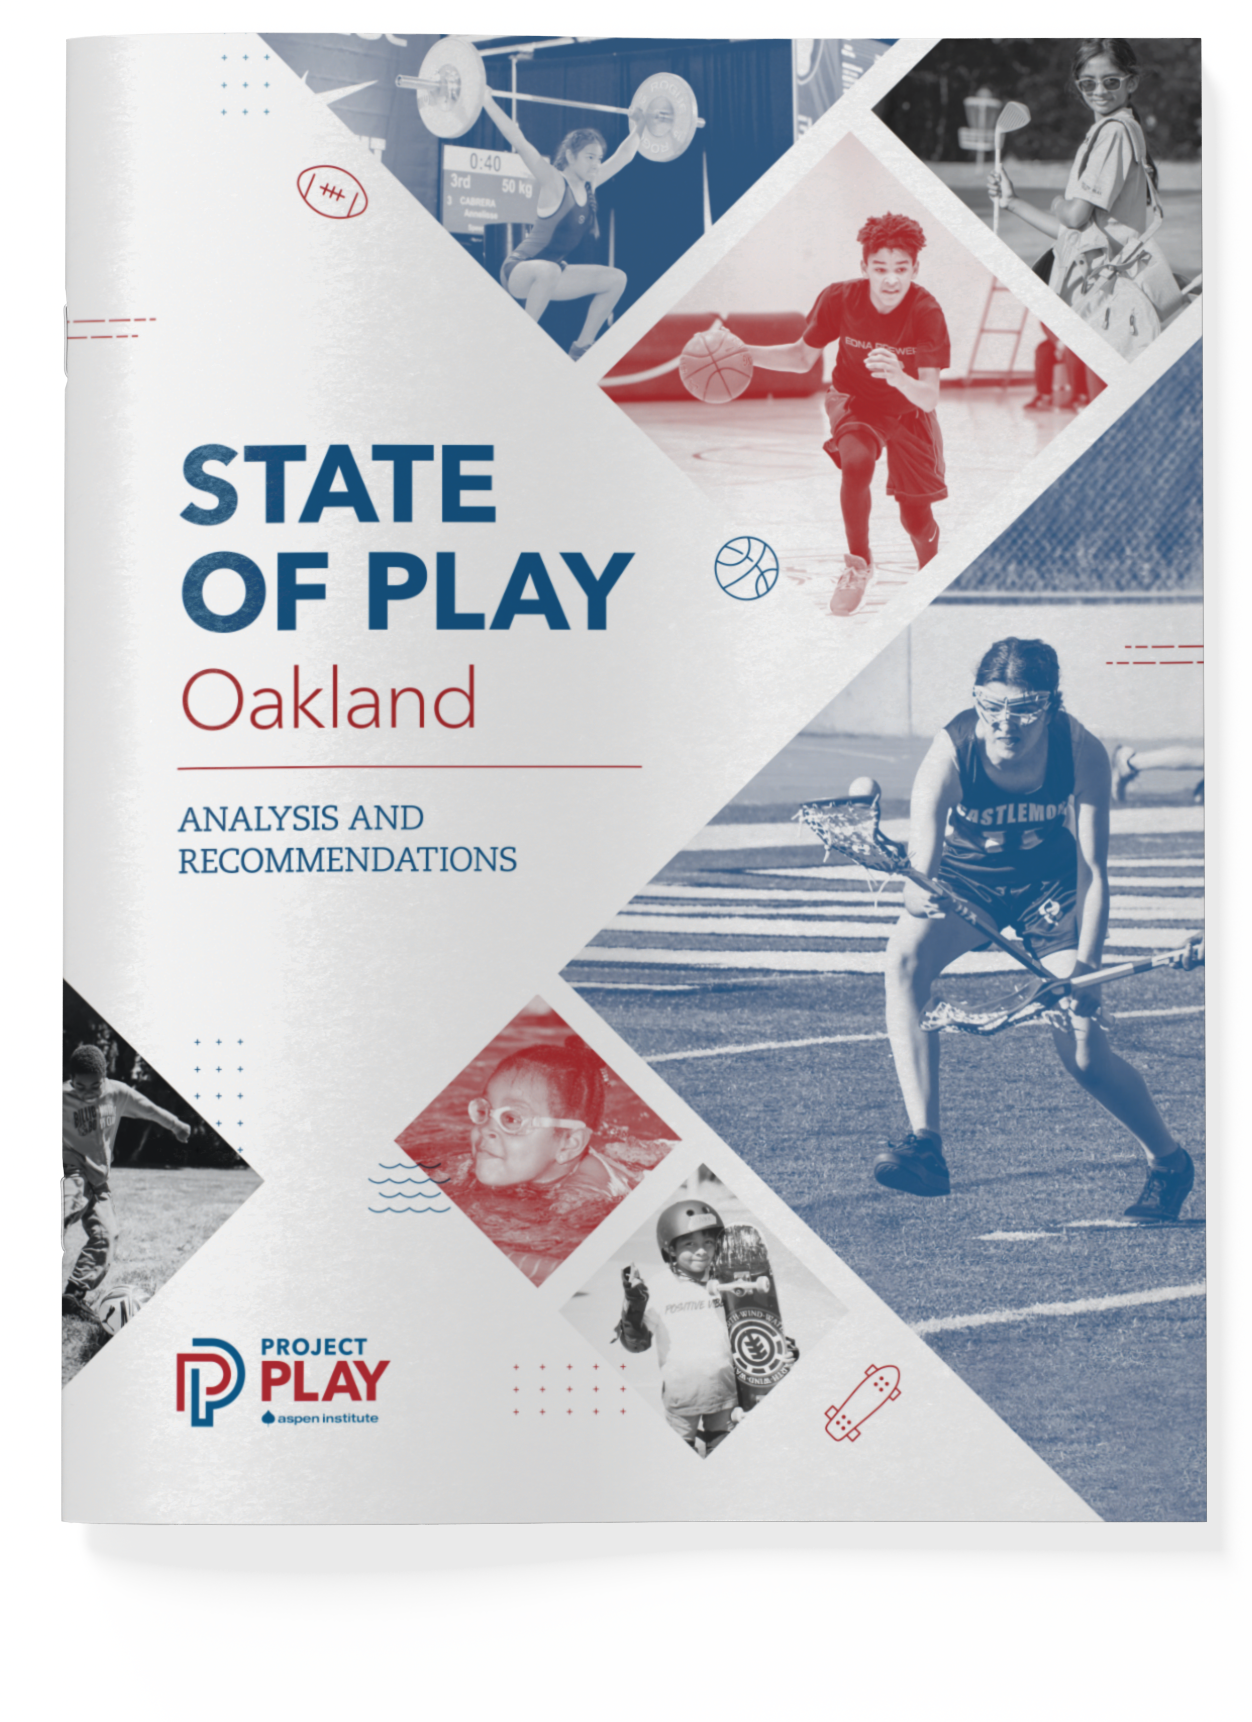 State of Play Oakland - The Aspen Institute